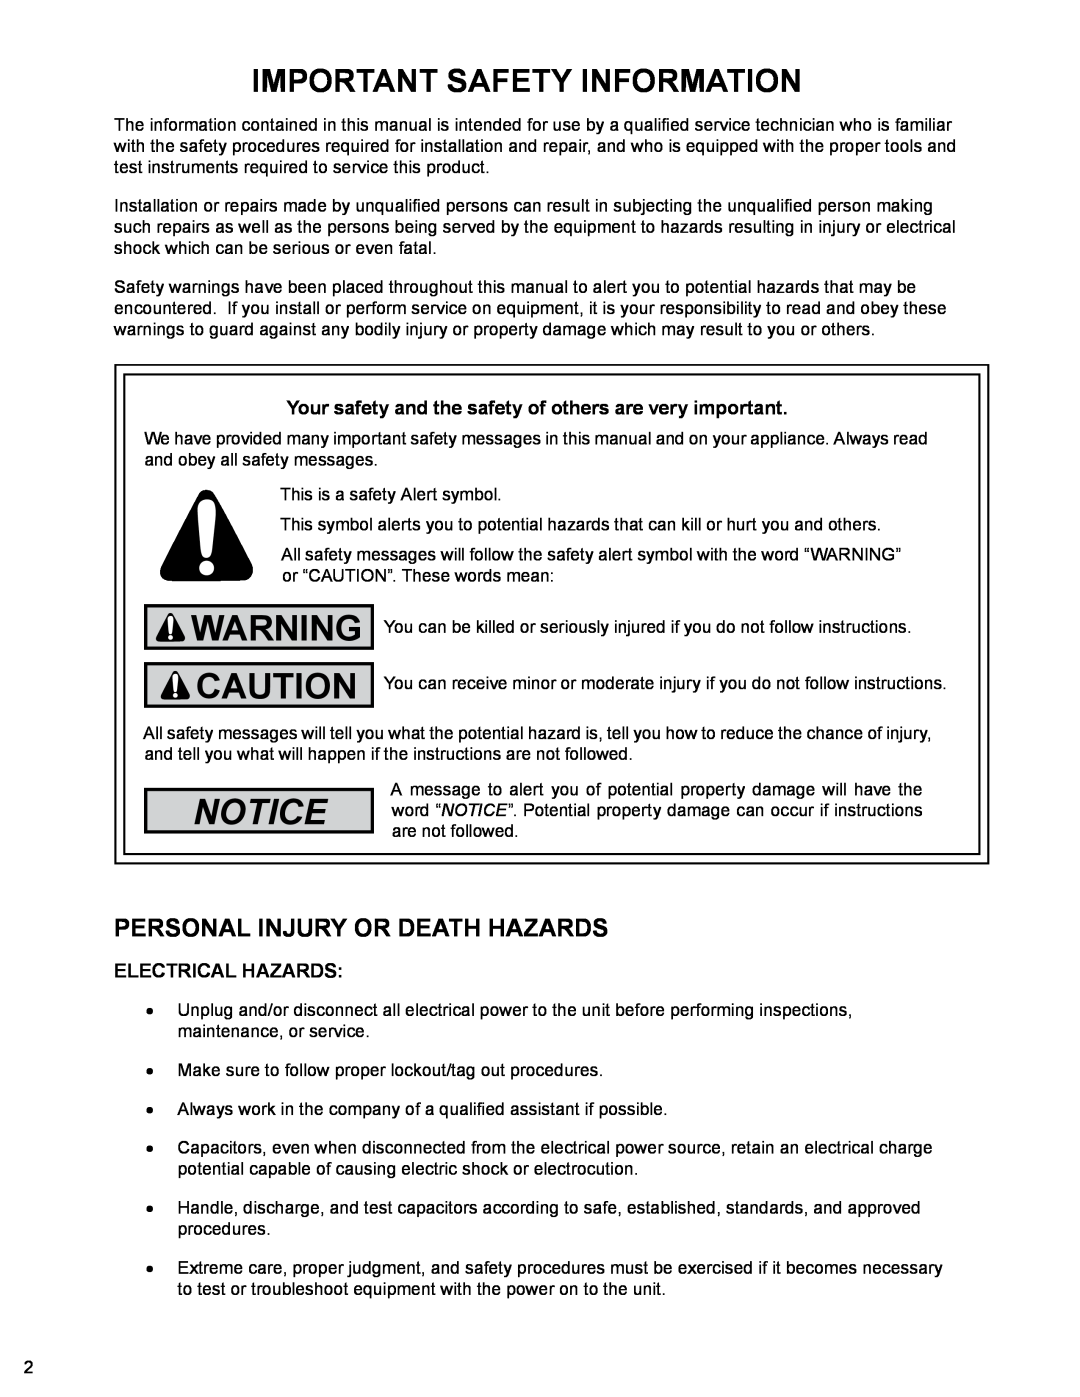 Friedrich R-410A service manual Important Safety Information, Personal Injury Or Death Hazards, Notice 